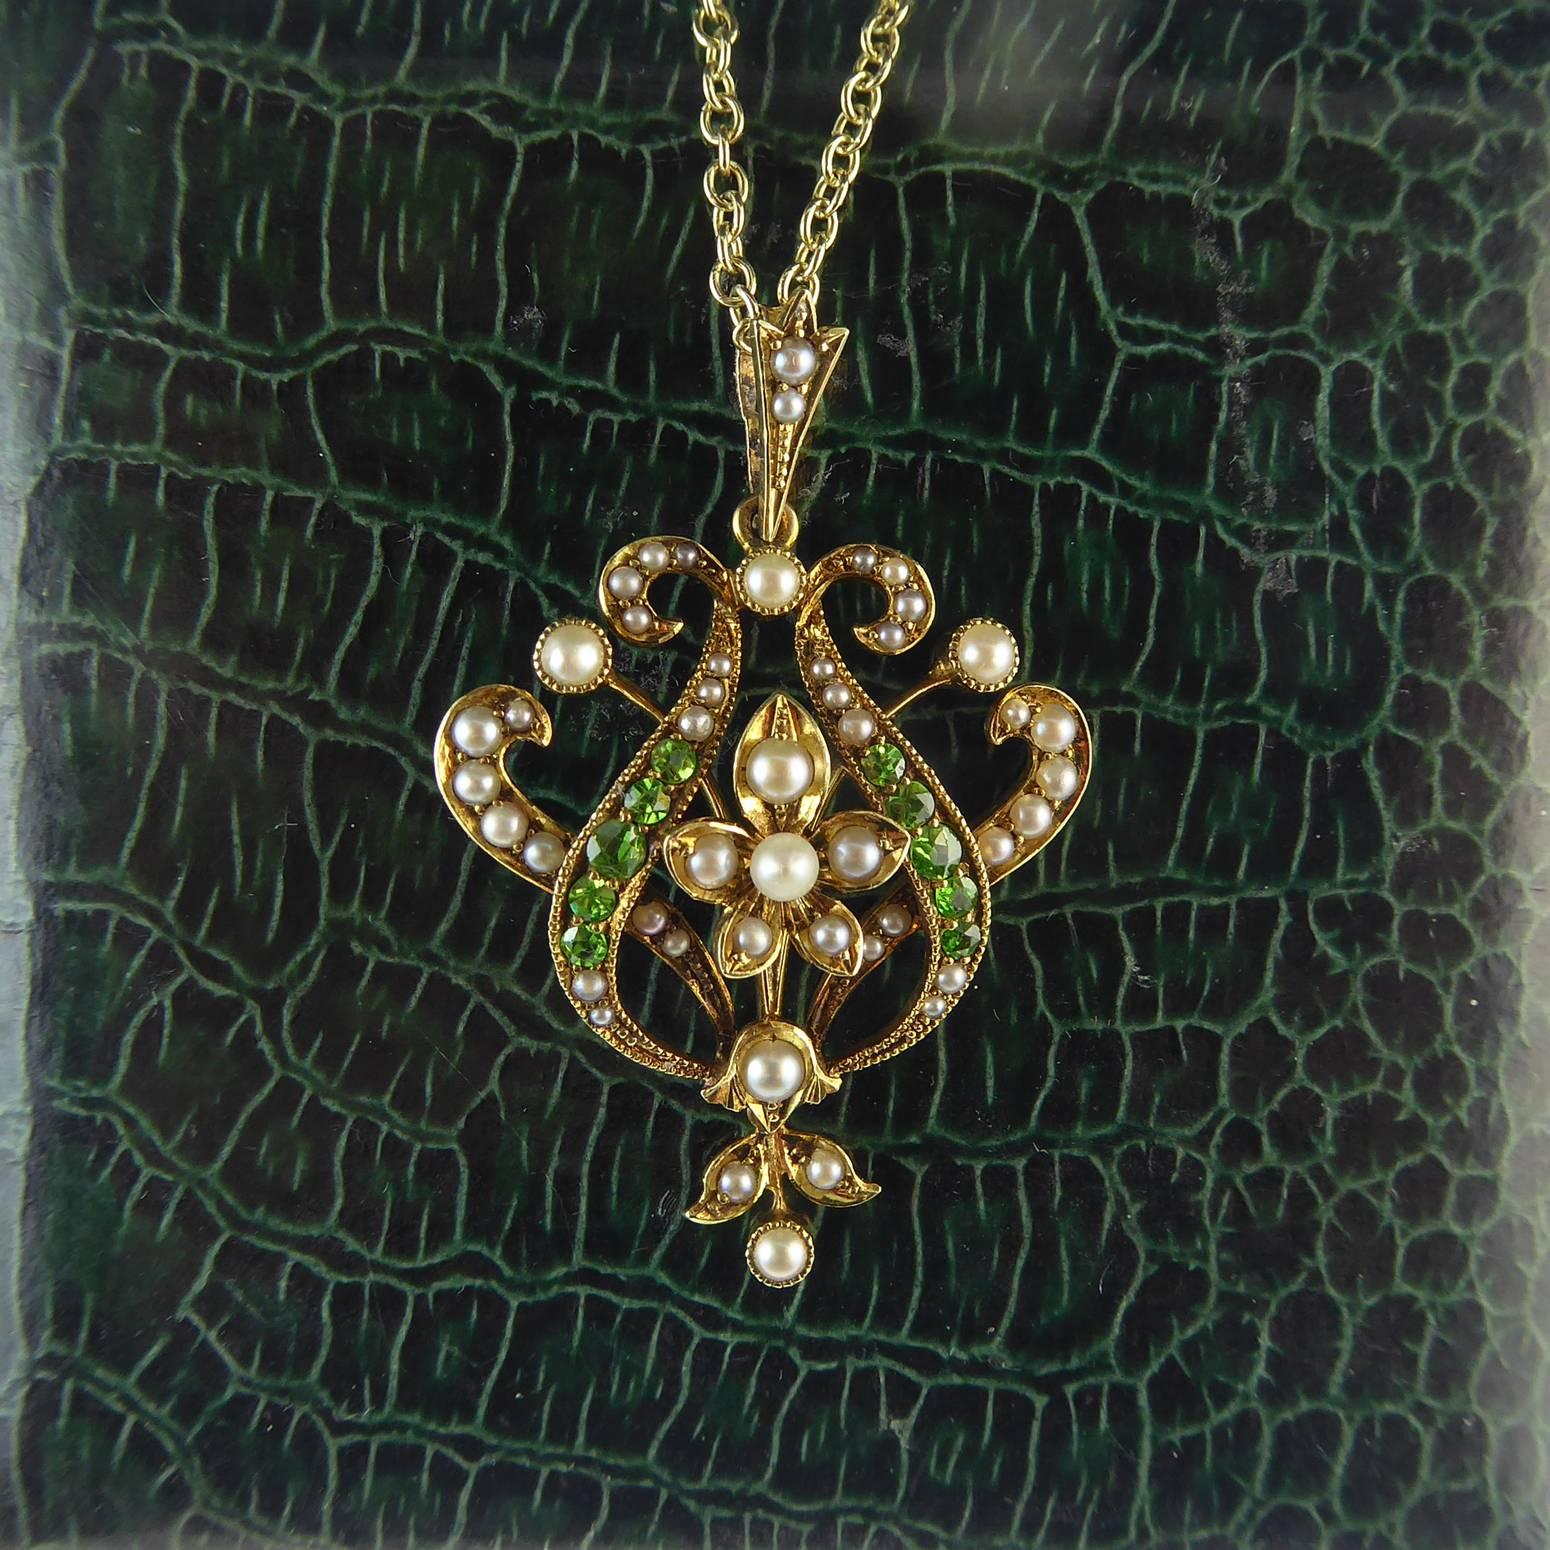 An antique pendant in a very graceful Art Nouveau style design of open wirework around a central pearl set floral motif.  The flower is bordered on either side by a swirl of sparkling demantoid garnets with pearl set curling finials.  Further swirls